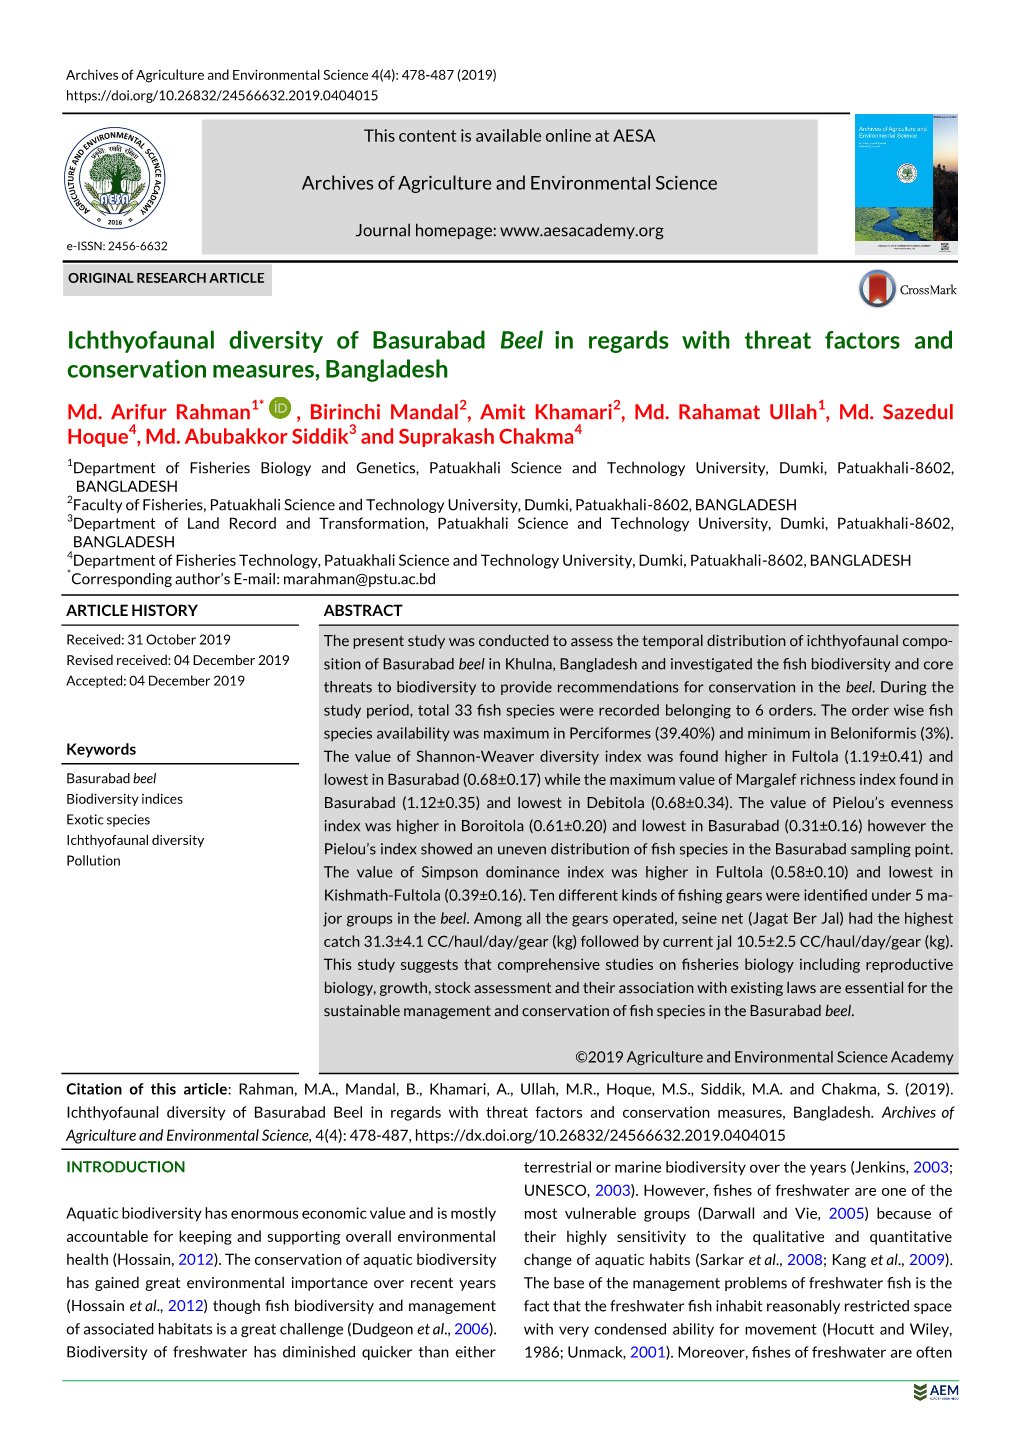 Ichthyofaunal Diversity of Basurabad Beel in Regards with Threat Factors and Conservation Measures, Bangladesh Md